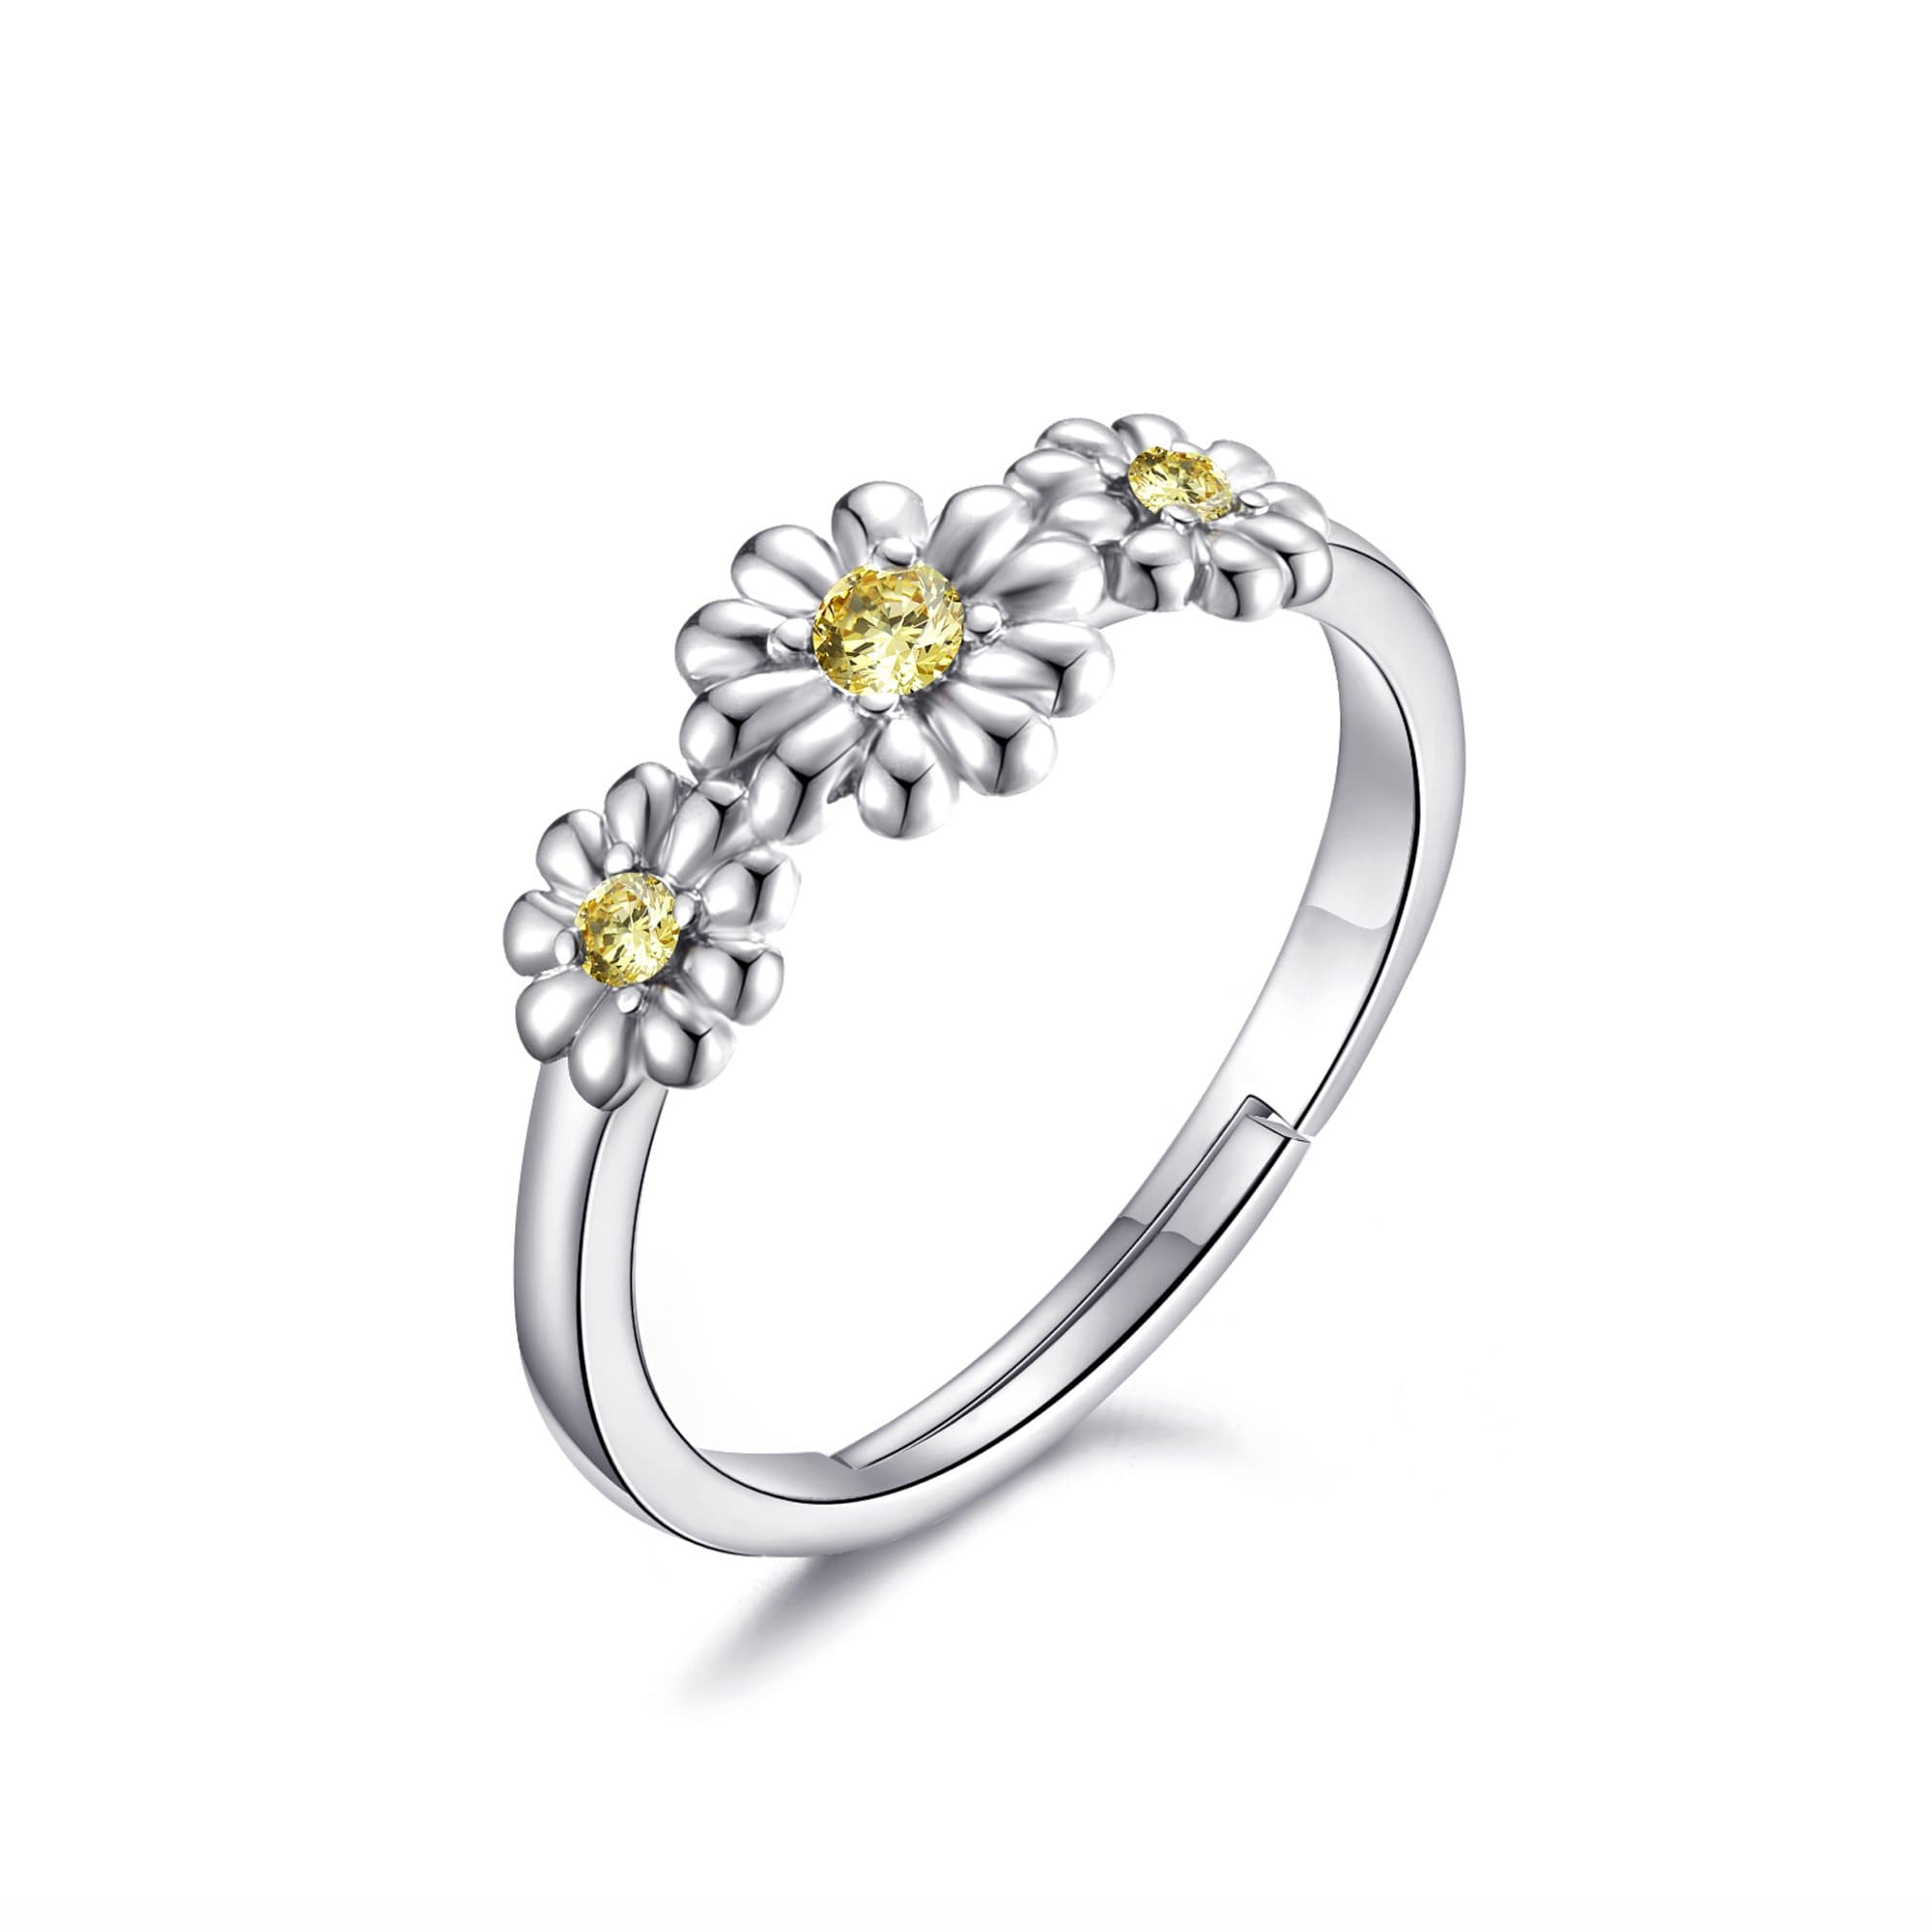 Adjustable Triple Crystal Daisy Ring Created with Zircondia® Crystals